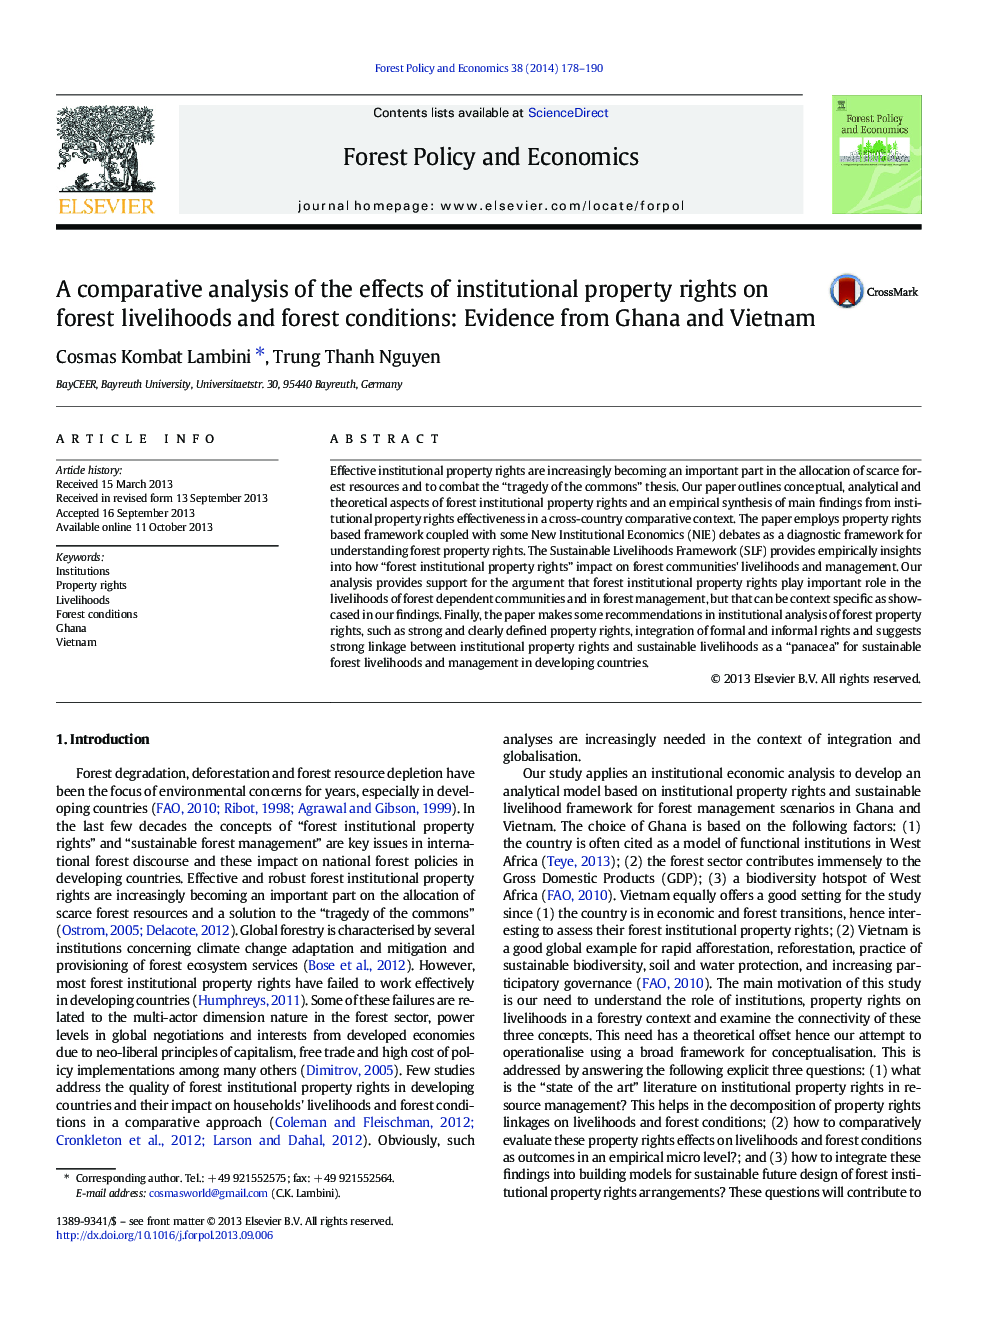 A comparative analysis of the effects of institutional property rights on forest livelihoods and forest conditions: Evidence from Ghana and Vietnam